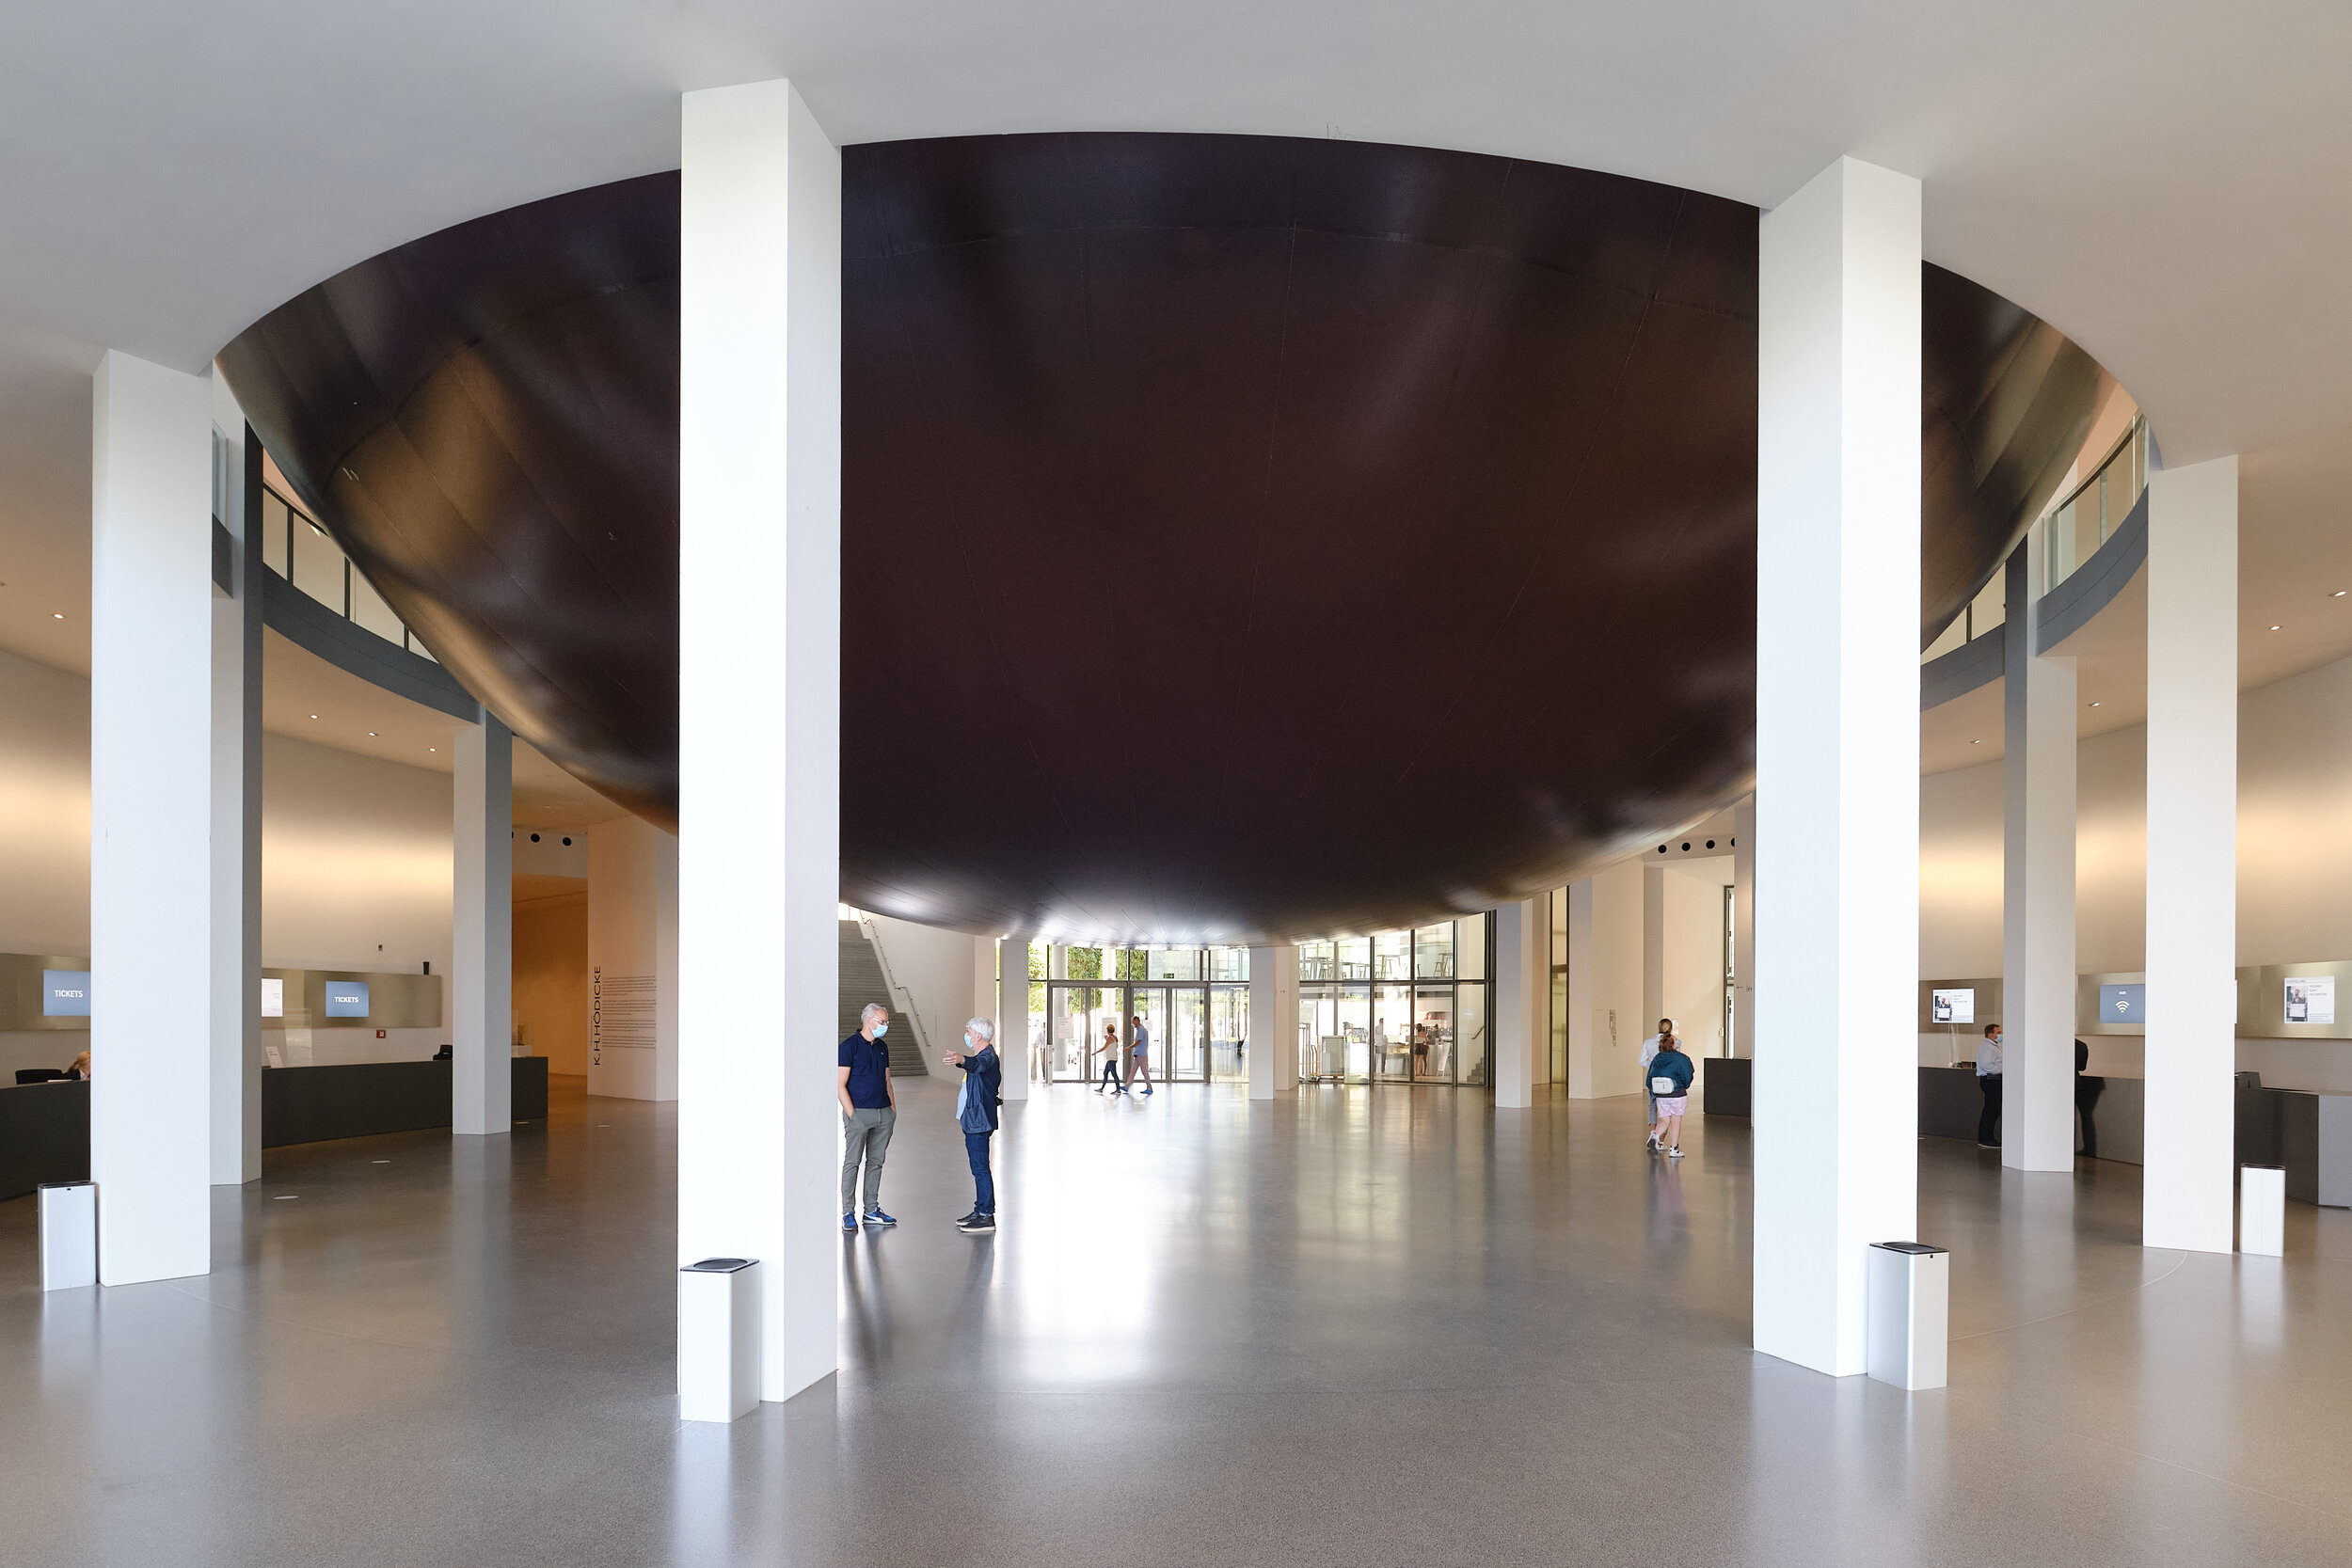   Pinakothek    A site specific sculpture temporarily installed within the entrance rotunda of the Pinakothek der Moderne, Munich, Germany in September 2020, to mark the 18 year anniversary of the museum opening.   Tensys undertook the fabric analysi